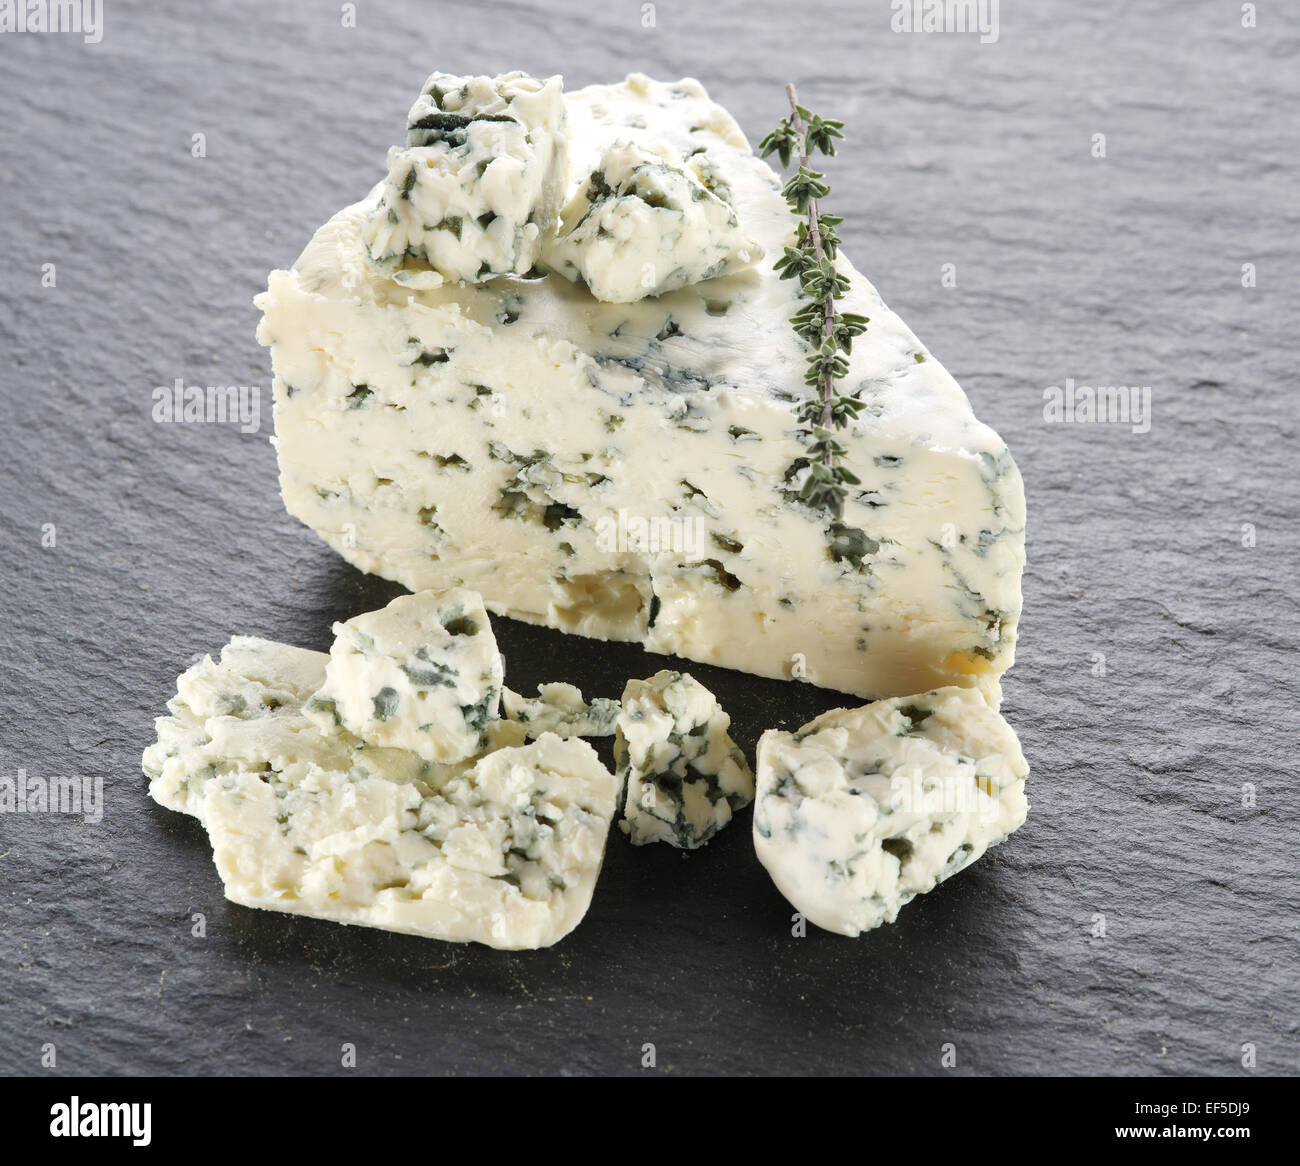 Slices of Danish Blue cheese on the gray stone surface. Stock Photo